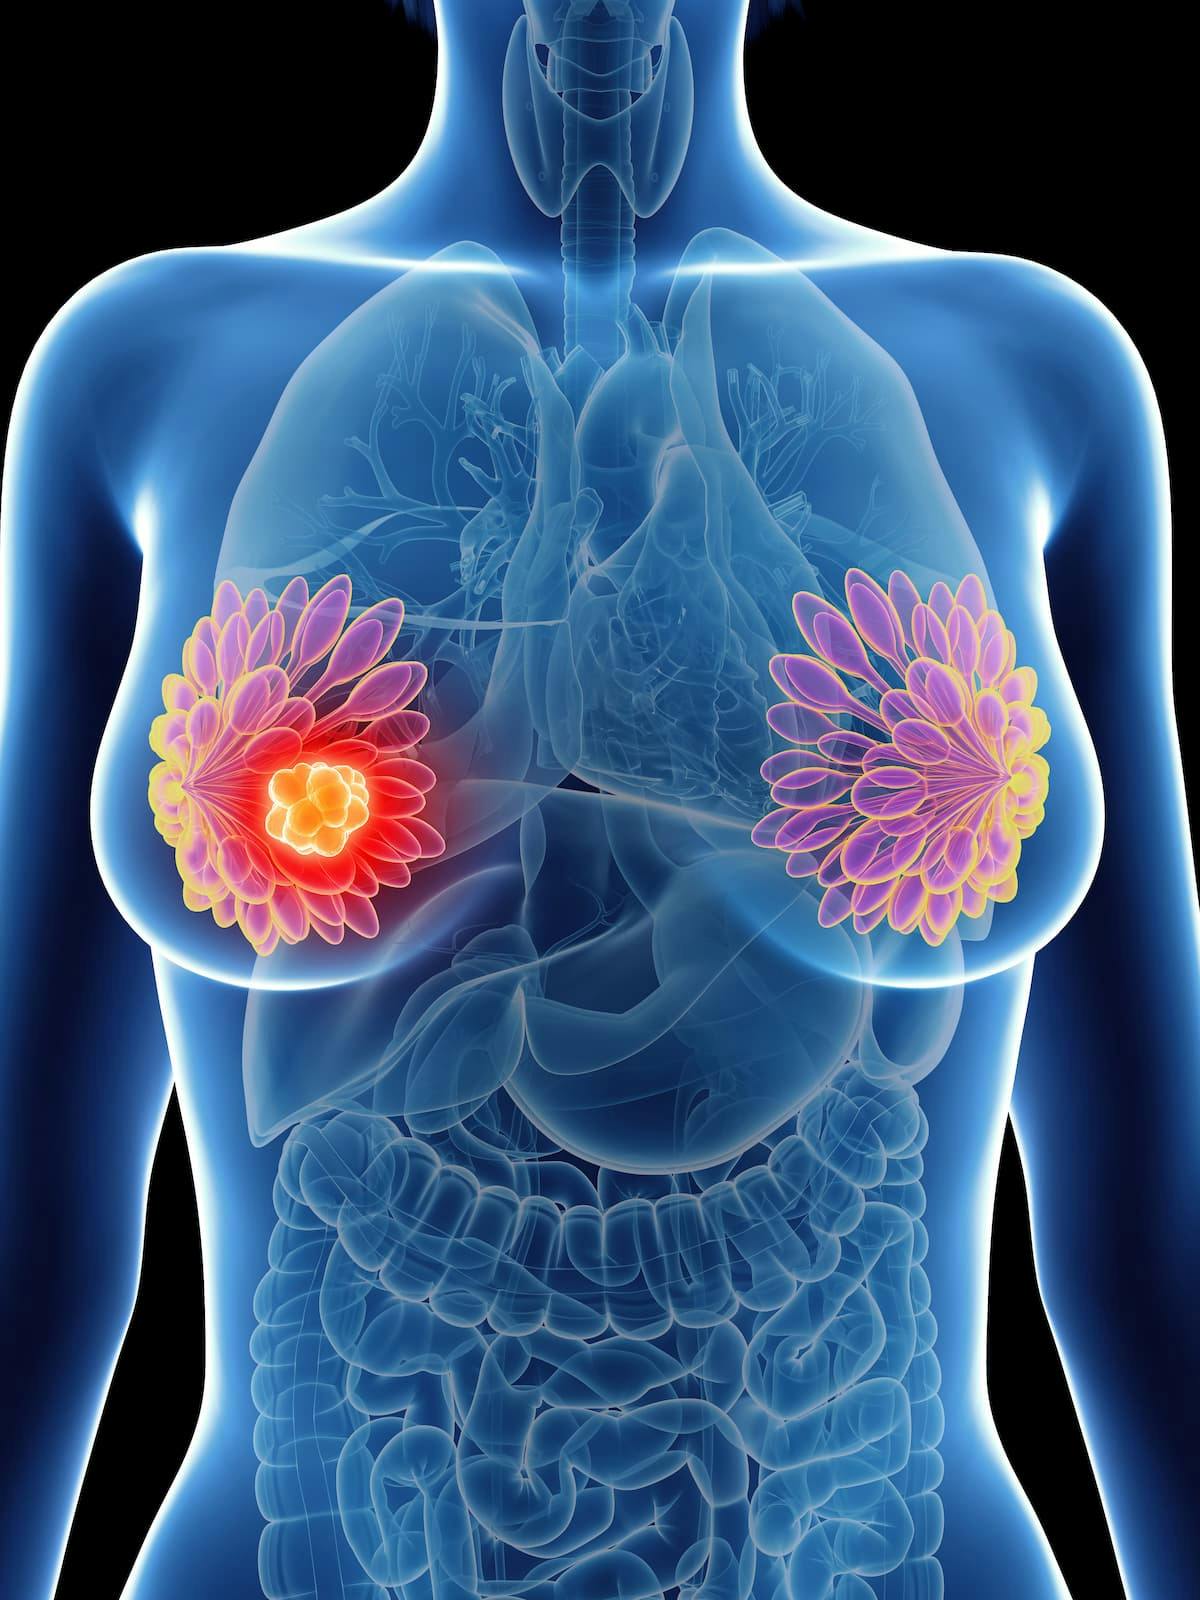 Oral selective estrogen receptor degrader camizestrant elicited a statistically significant and clinically meaningful progression-free survival benefit compared with fulvestrant among patients with estrogen receptor–positive locally advanced or metastatic breast cancer.